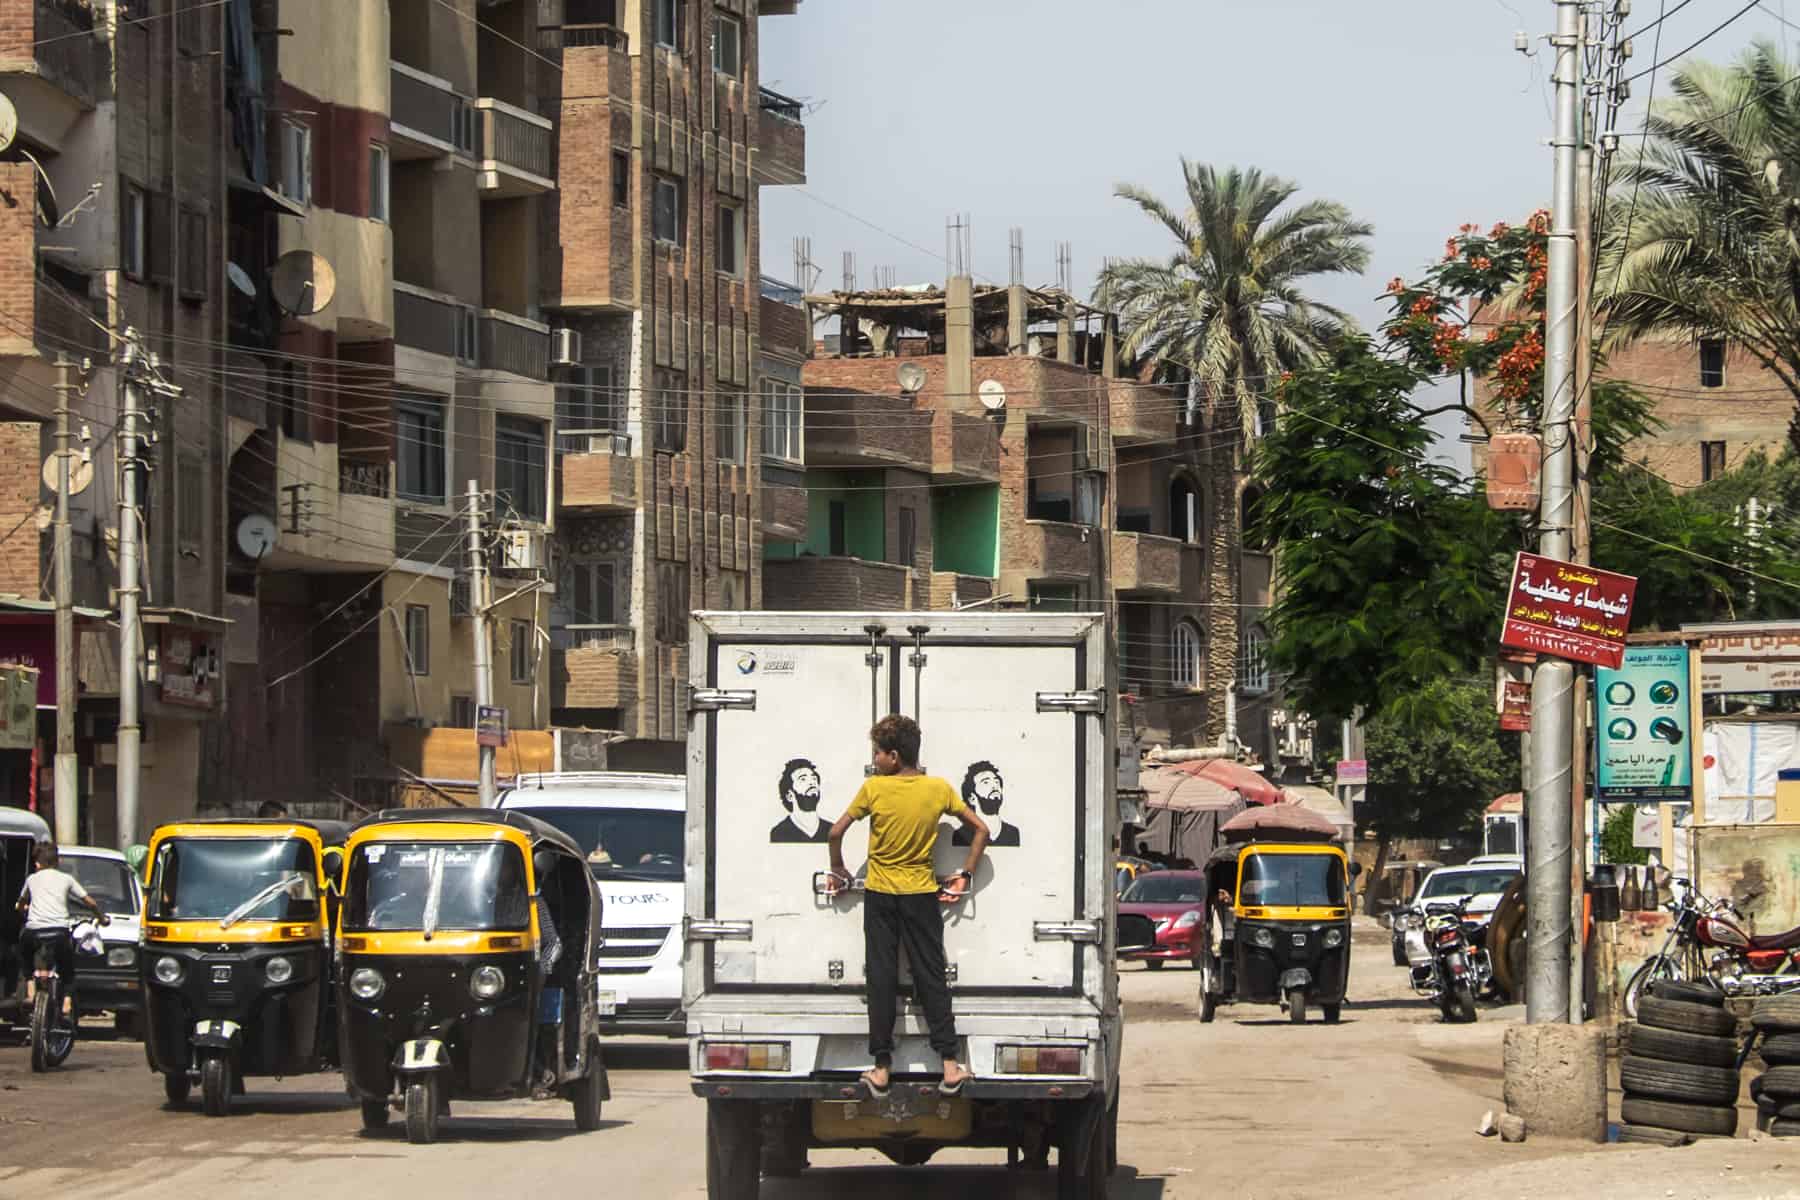 A young boy hangs off the back of a white van in Egypt, a free ride on a busy road. Black and yellow tuk tuks pass the van.